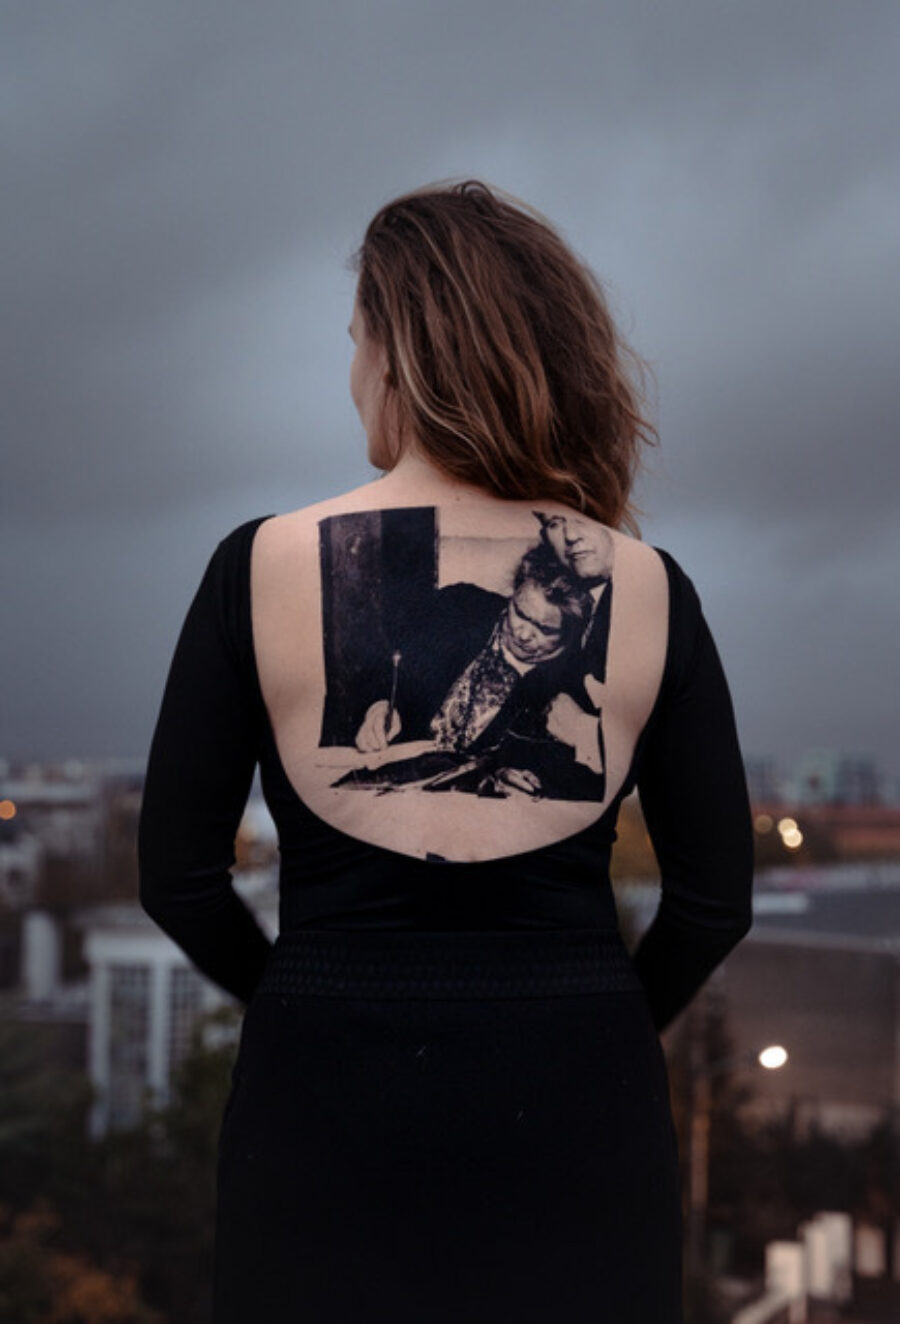 A woman stands with her back to the camera wearing a black shirt that leaves her back bare. An image is imprinted on her skin.